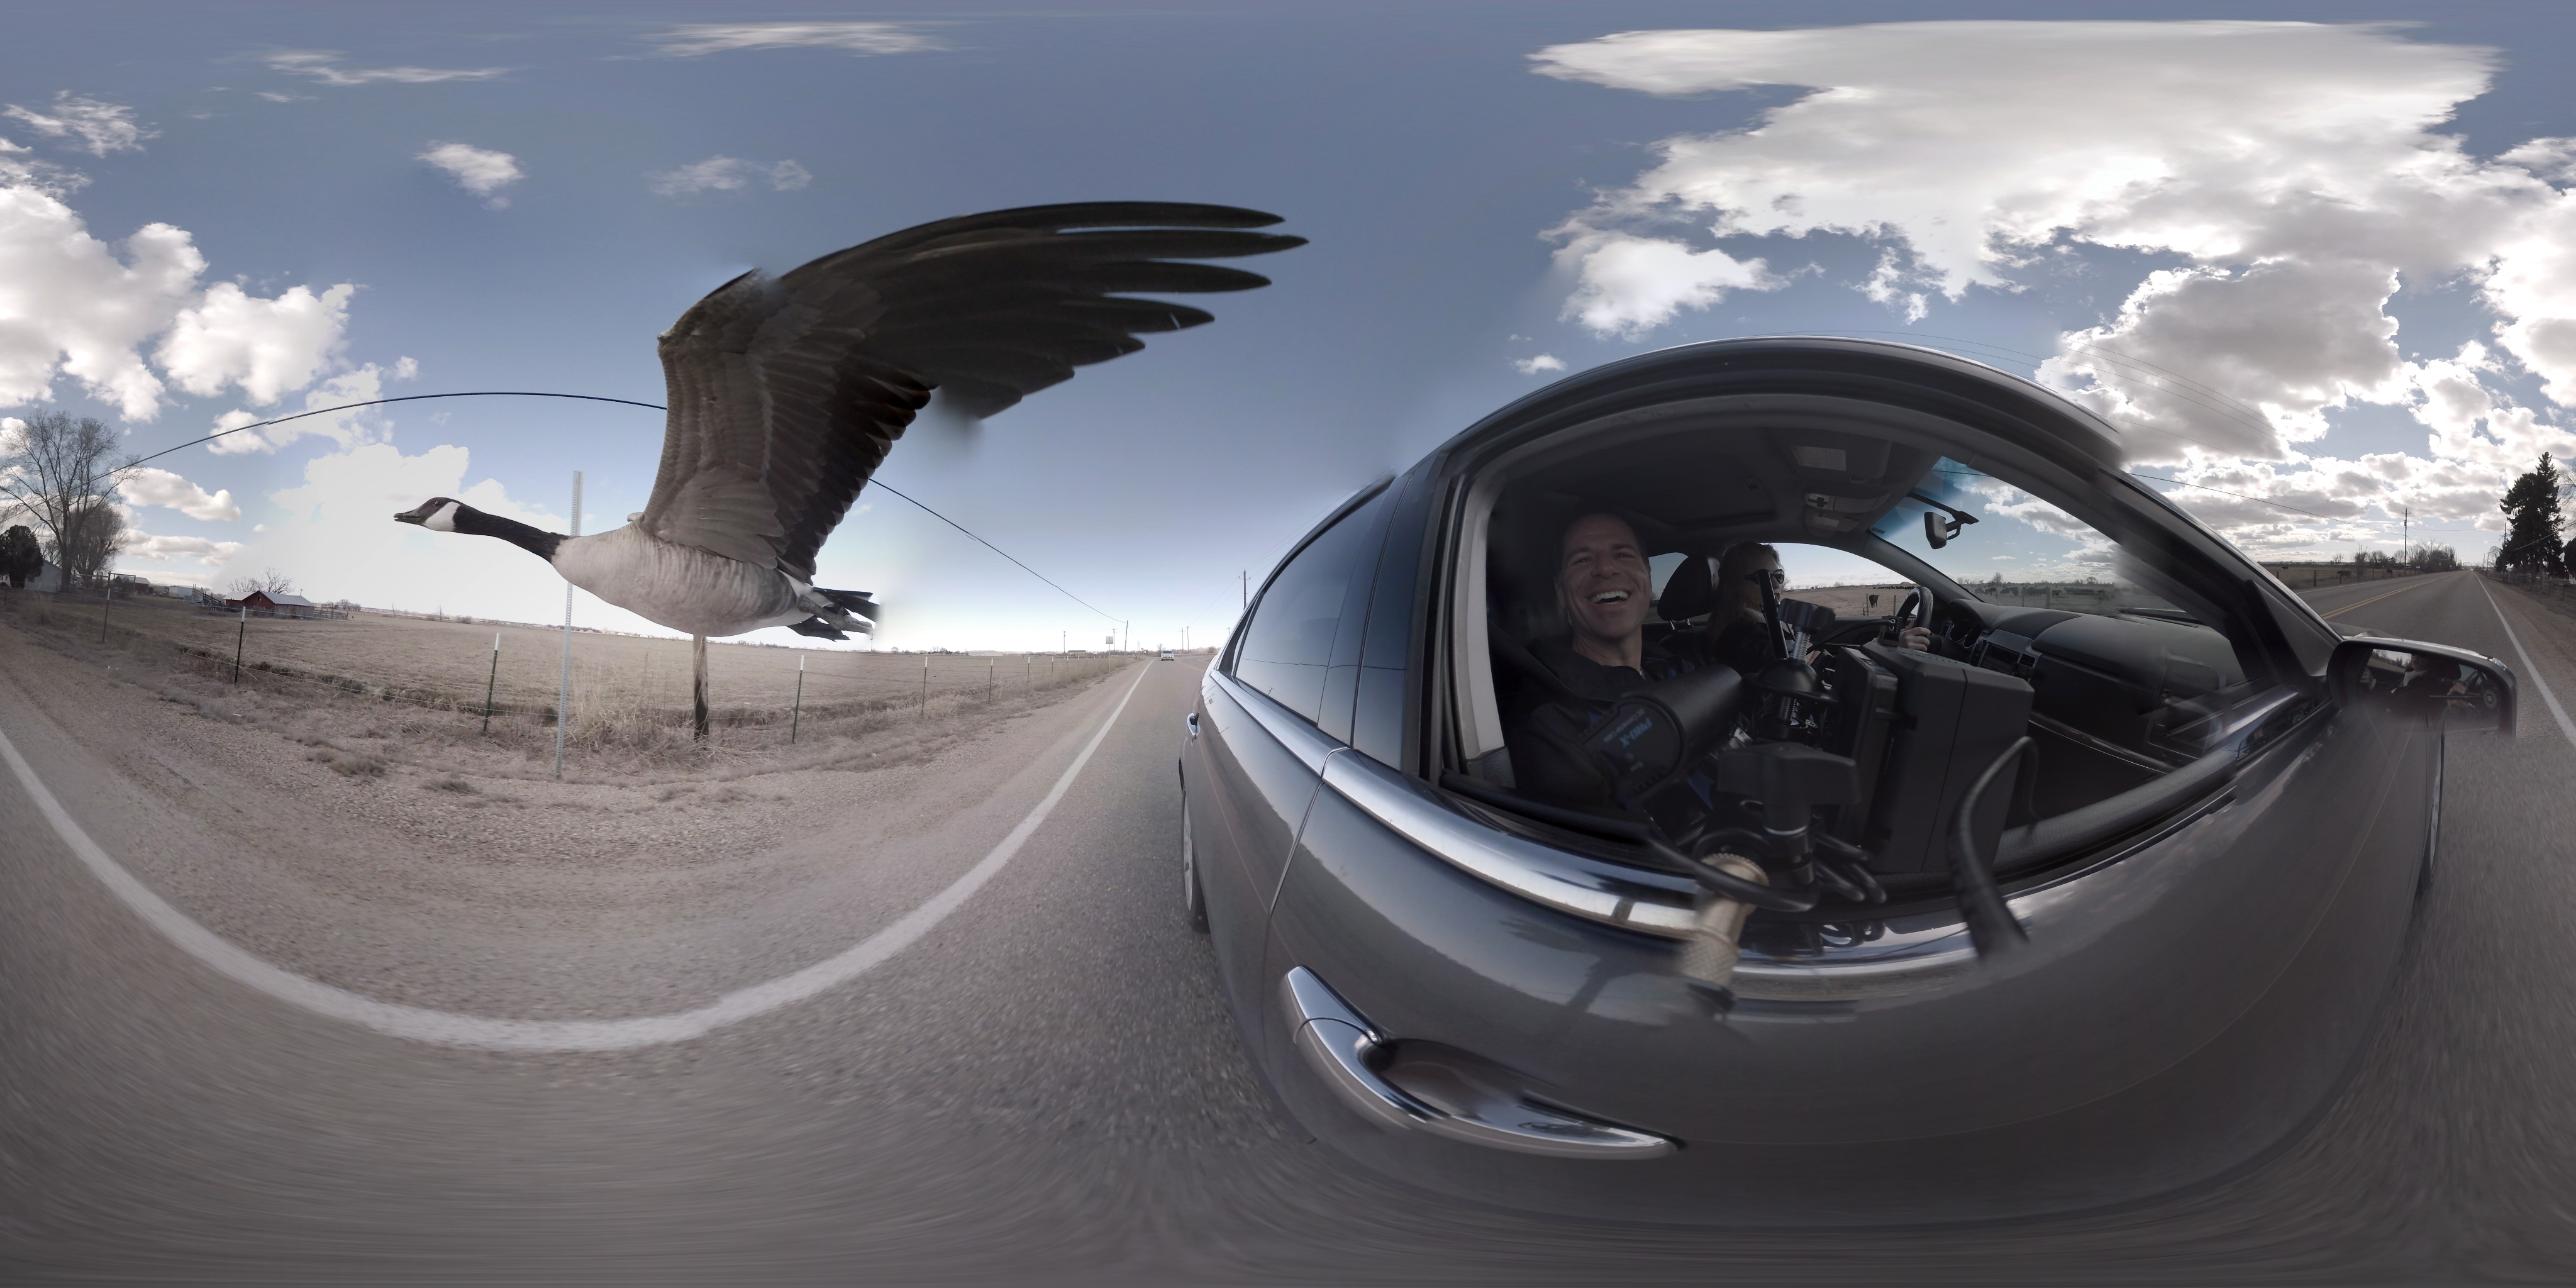 360 VIDEO: Be a wing-man to a goose in love